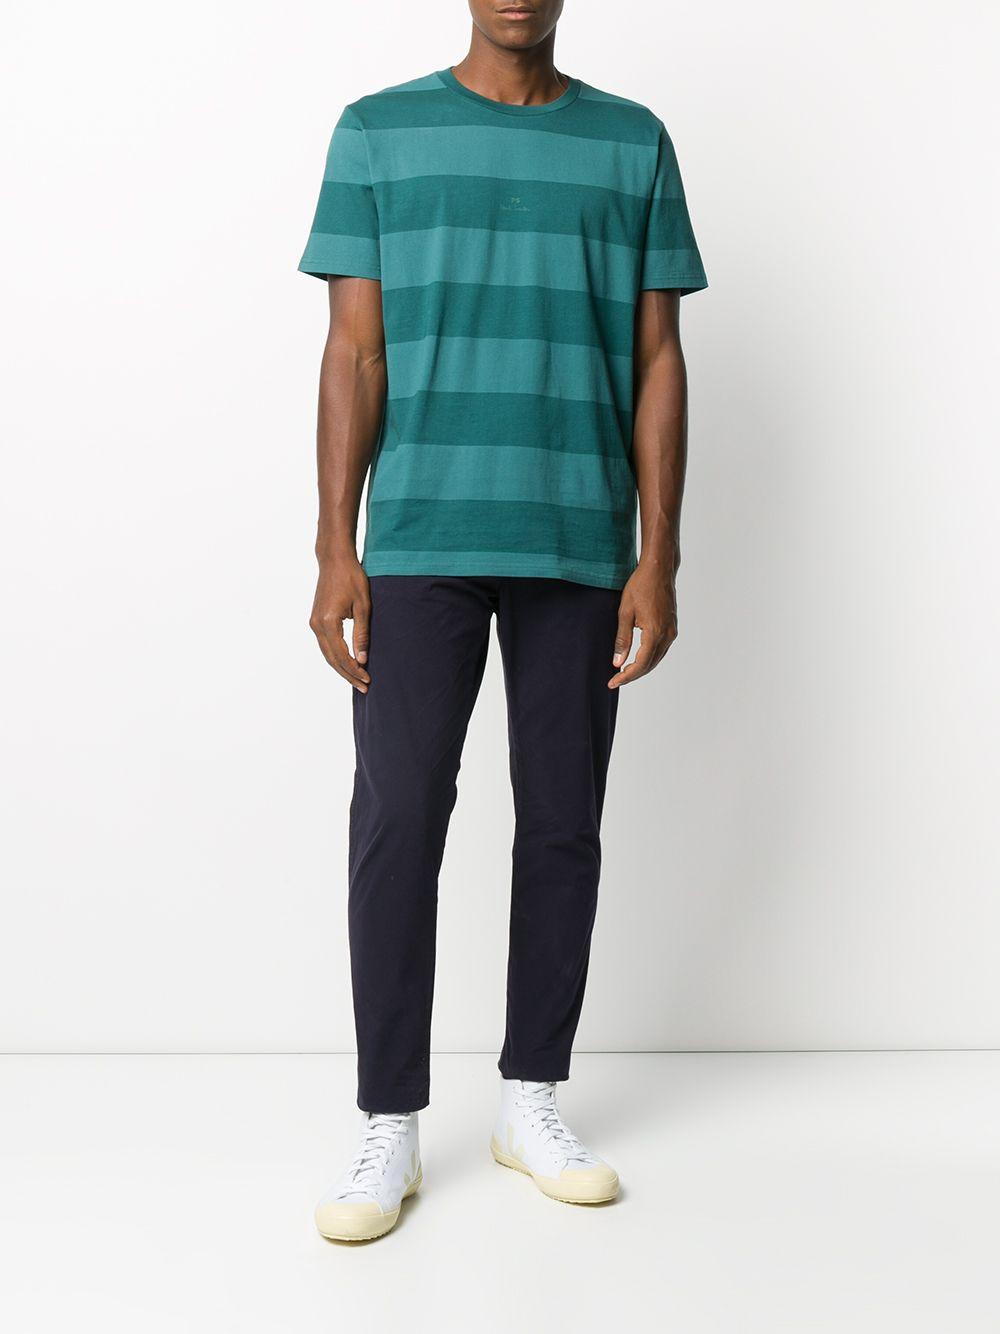 PS by Paul Smith Cotton Casual Striped T-shirt in Blue for Men - Lyst